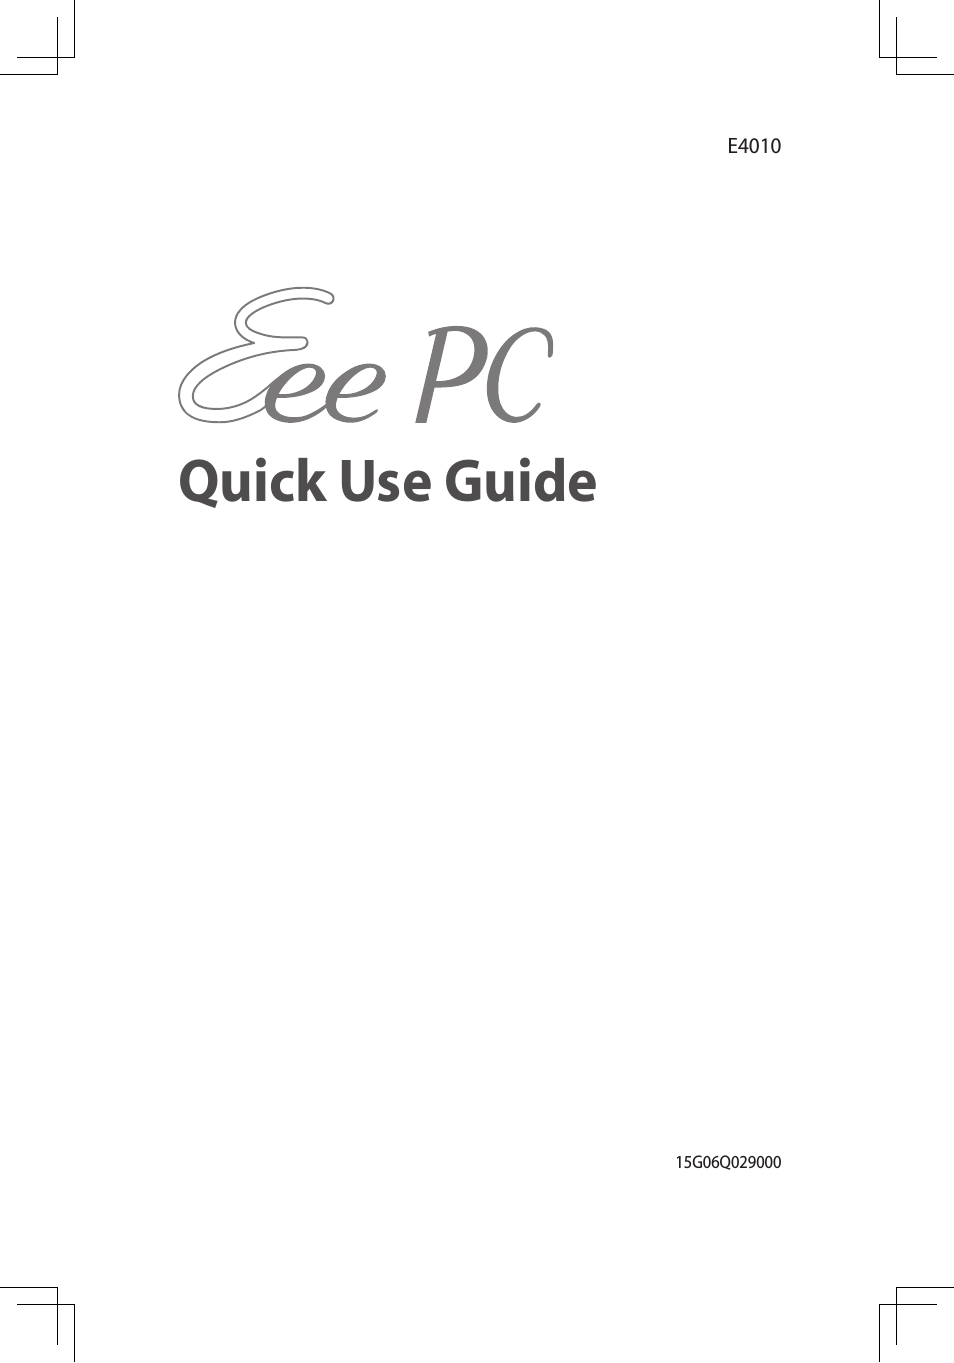 Eee PC 900A/Linux